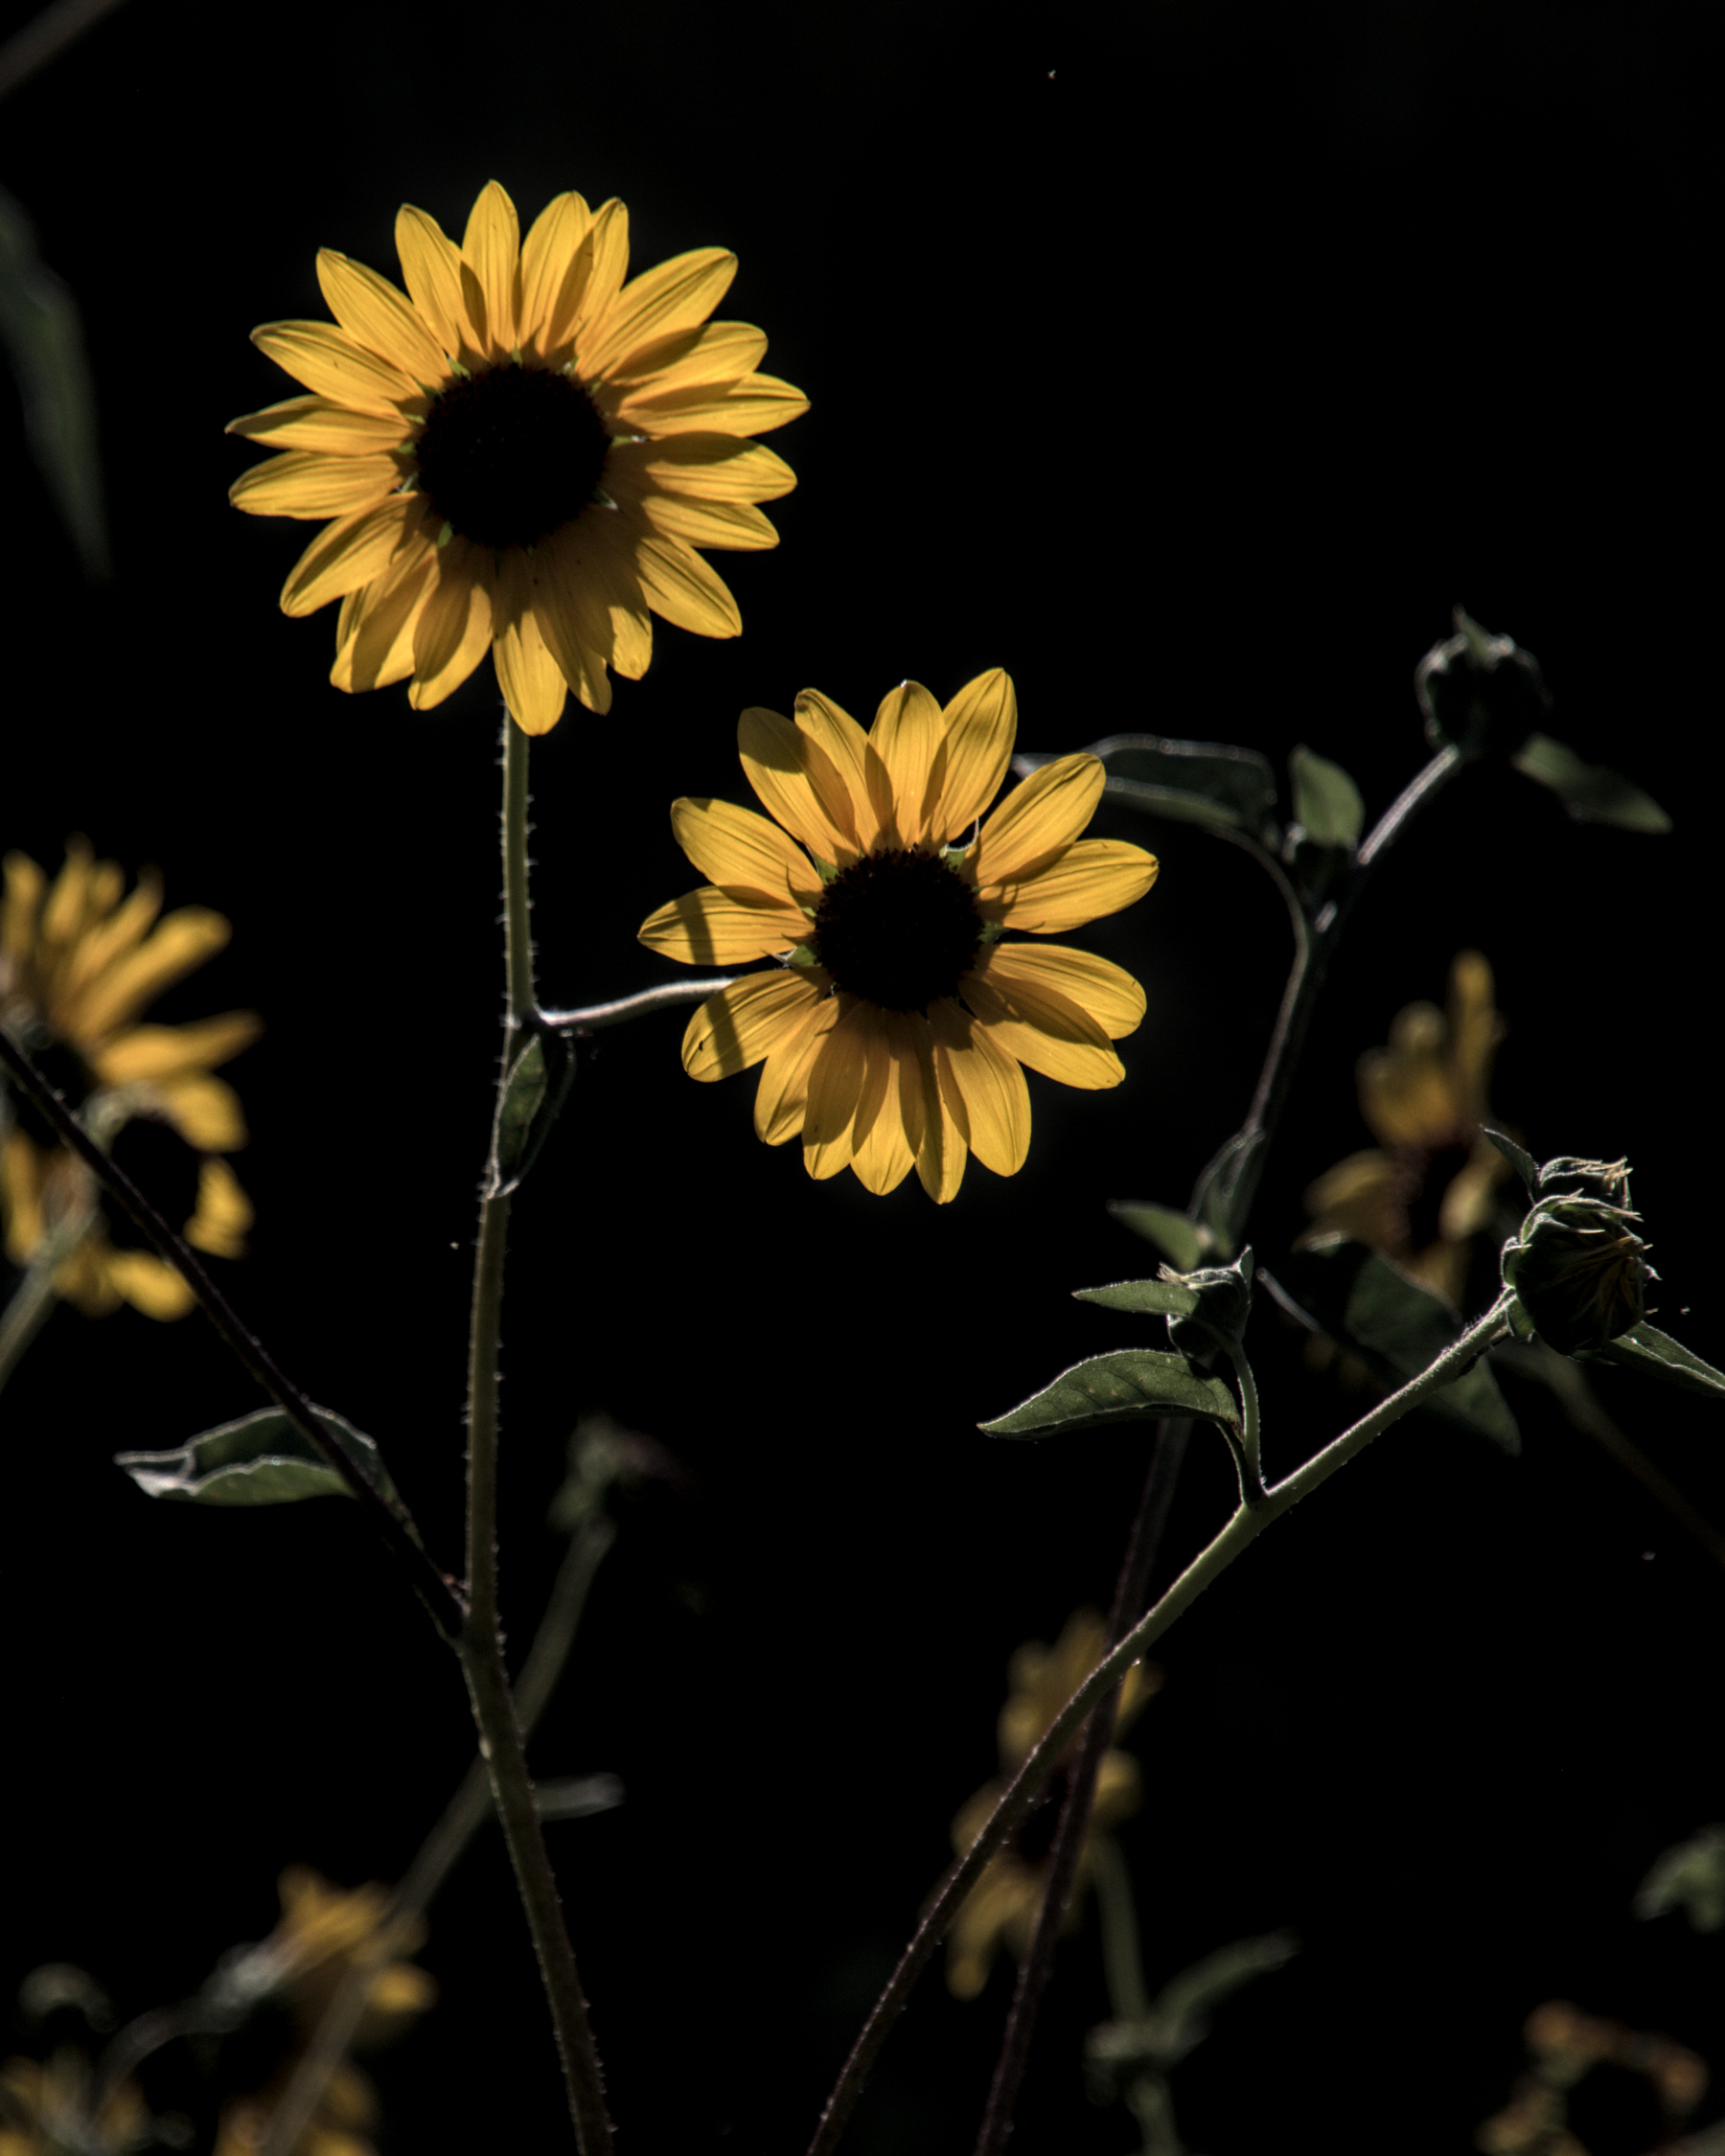 Two yellow blossoms on a single stalk, back-lit by the sun, so that their petals glow.